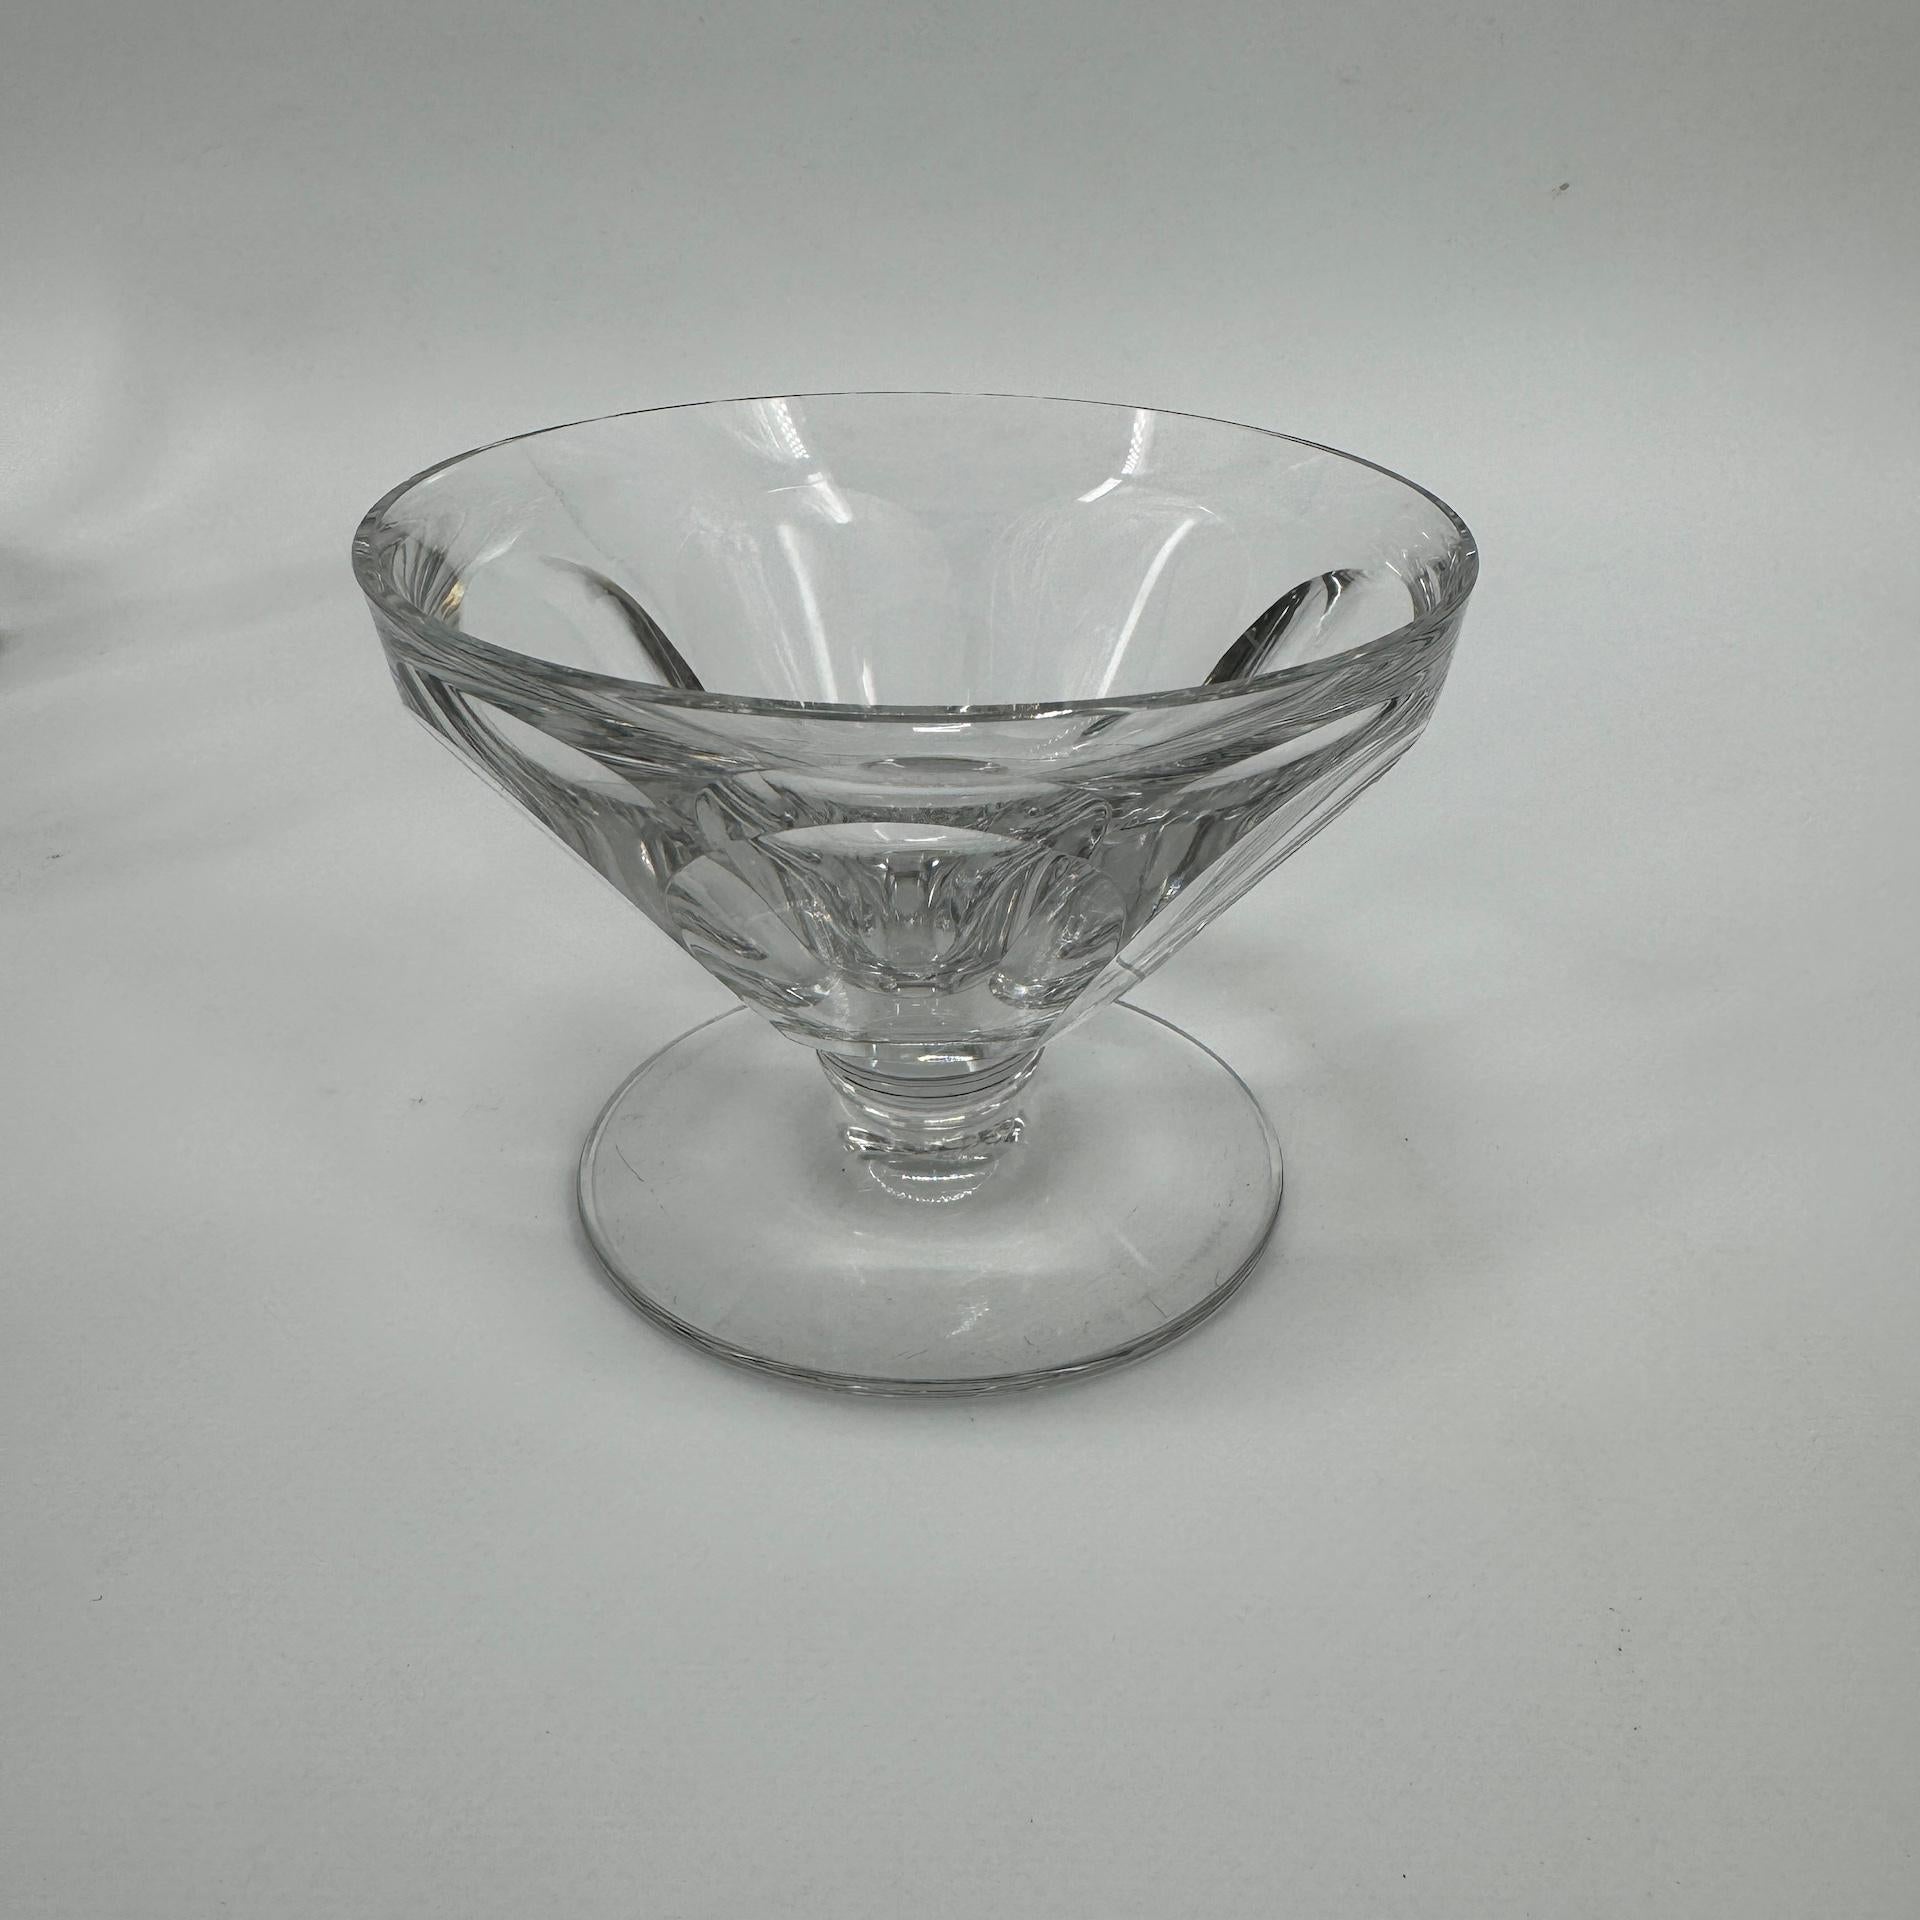 8 Baccarat Crystal Champagne or Cocktail Glasses, Talleyrand Model, Art Deco Era For Sale 2